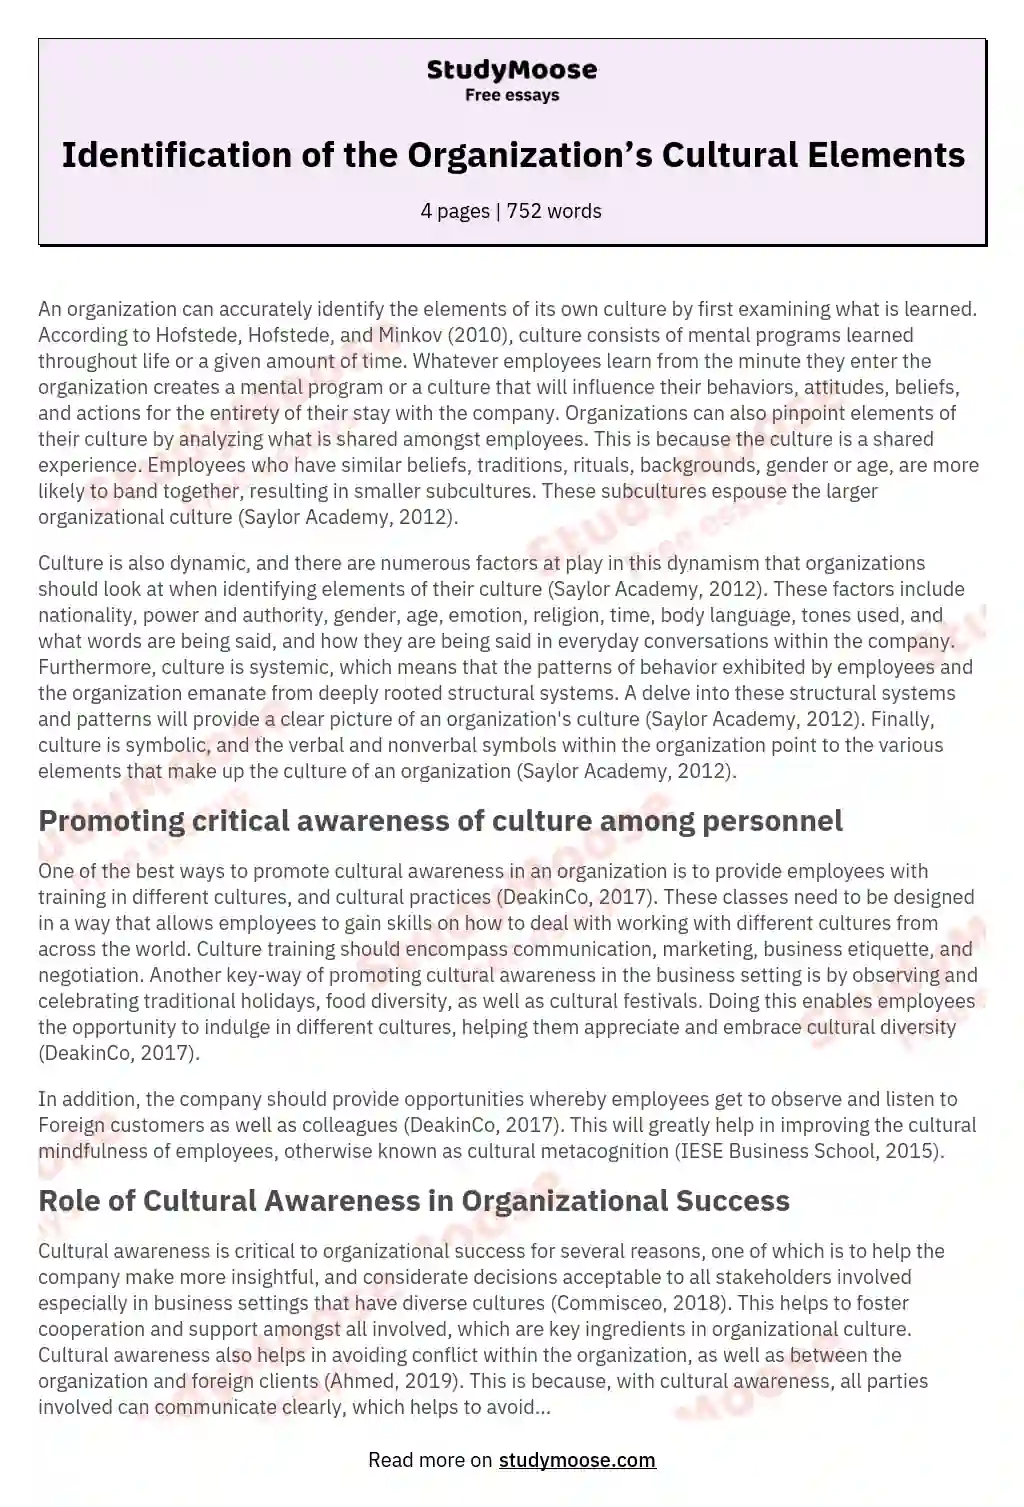 Identification of the Organization’s Cultural Elements essay